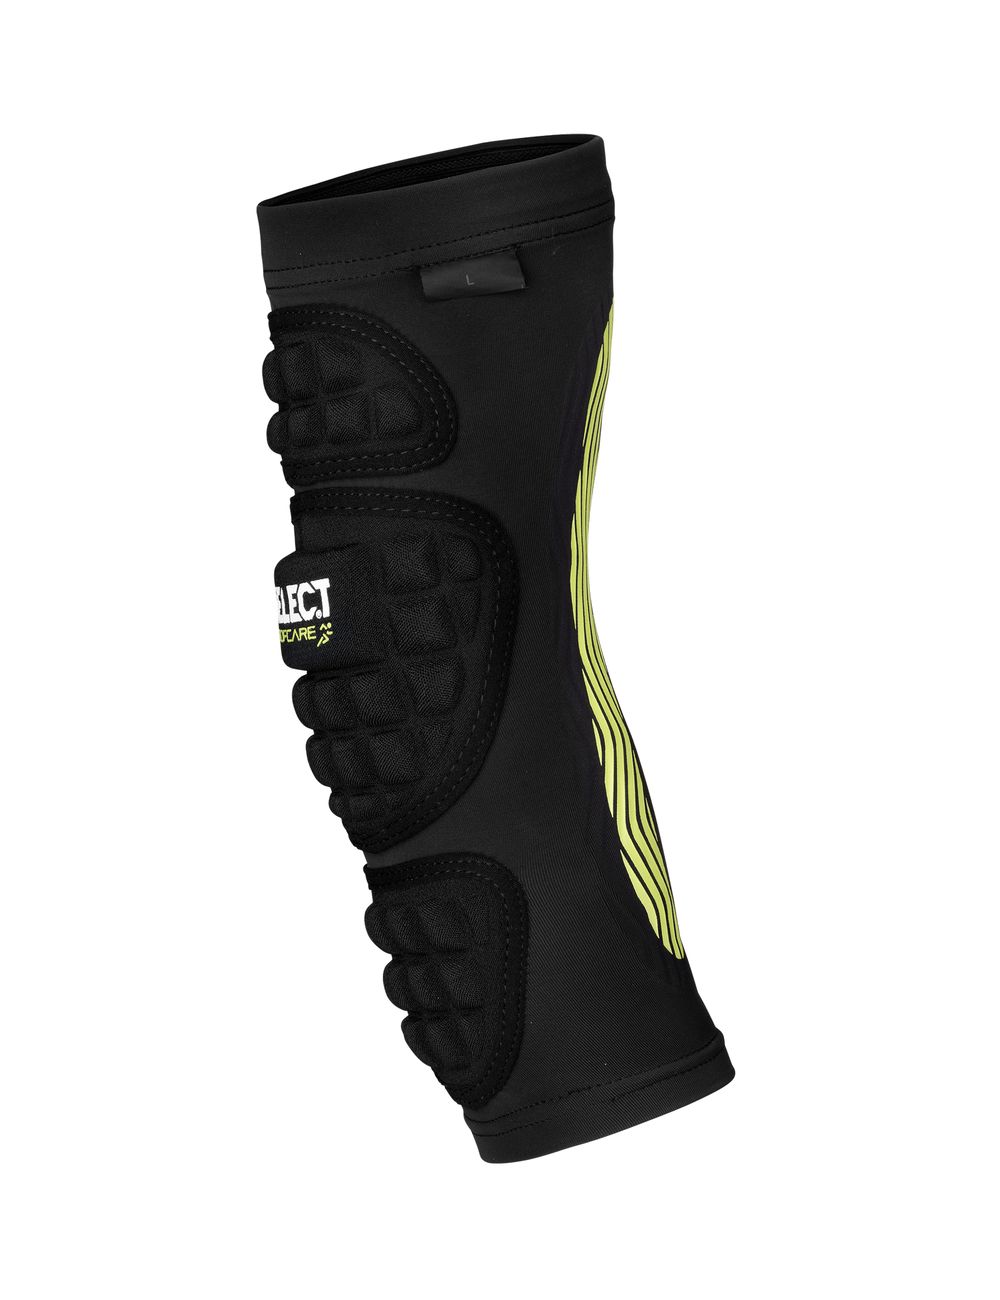 compression_elbow_support_6650_handball_with_pads_black_no_background